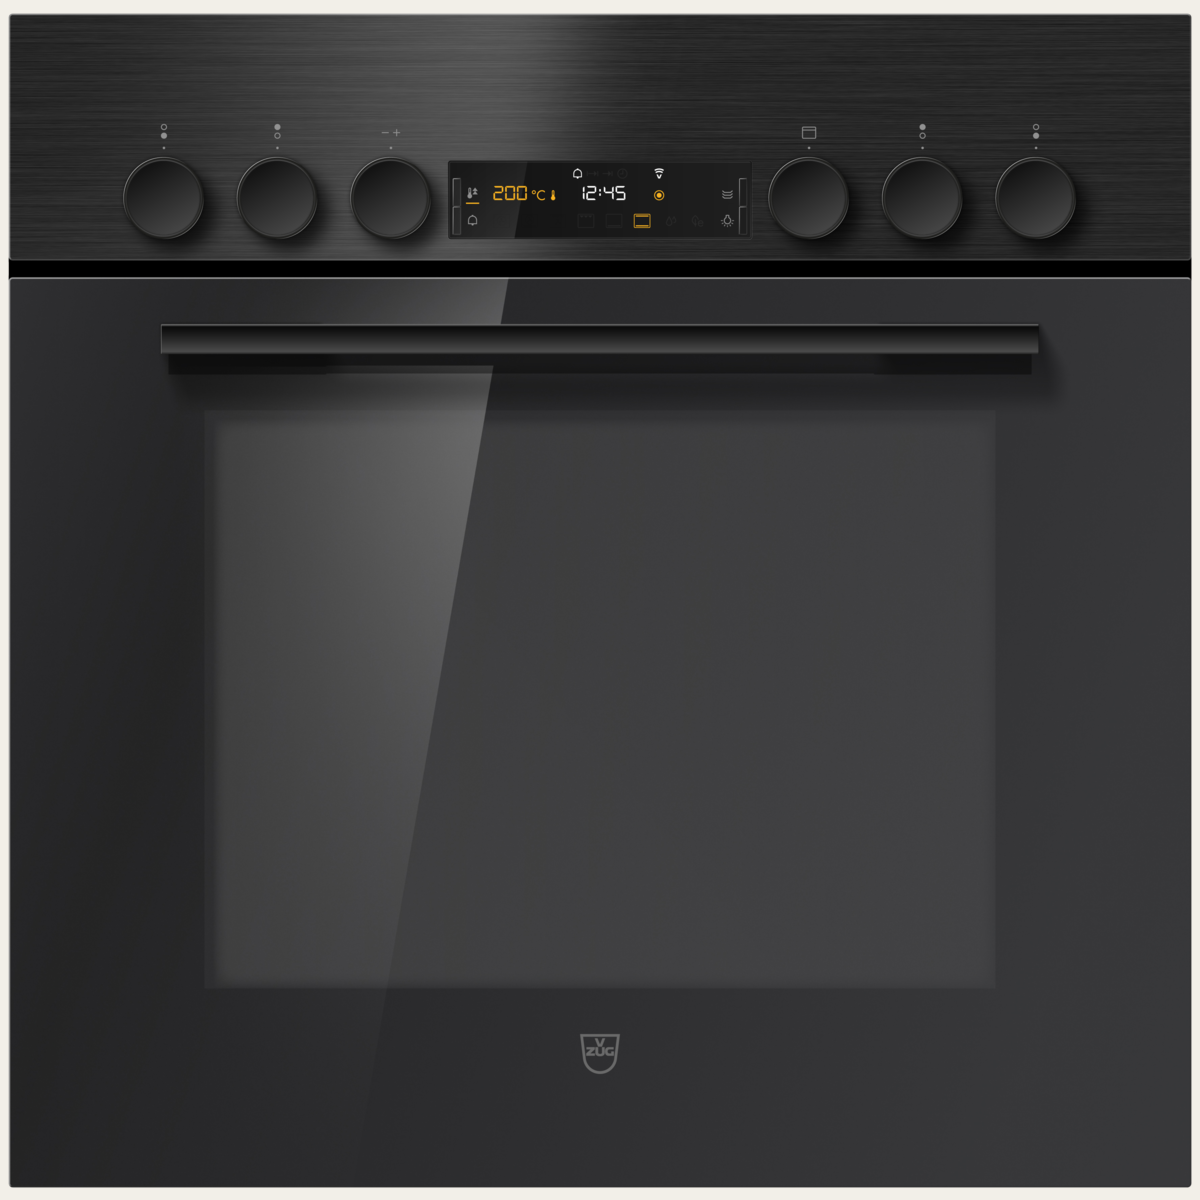 V-ZUG Cooker Combair V400 6UH, Standard width: 60 cm, Standard height: 60 cm, Nero, Handle: Nero, dial, V-ZUG-Home, TopClean, Number of controllable cooking zones: 4